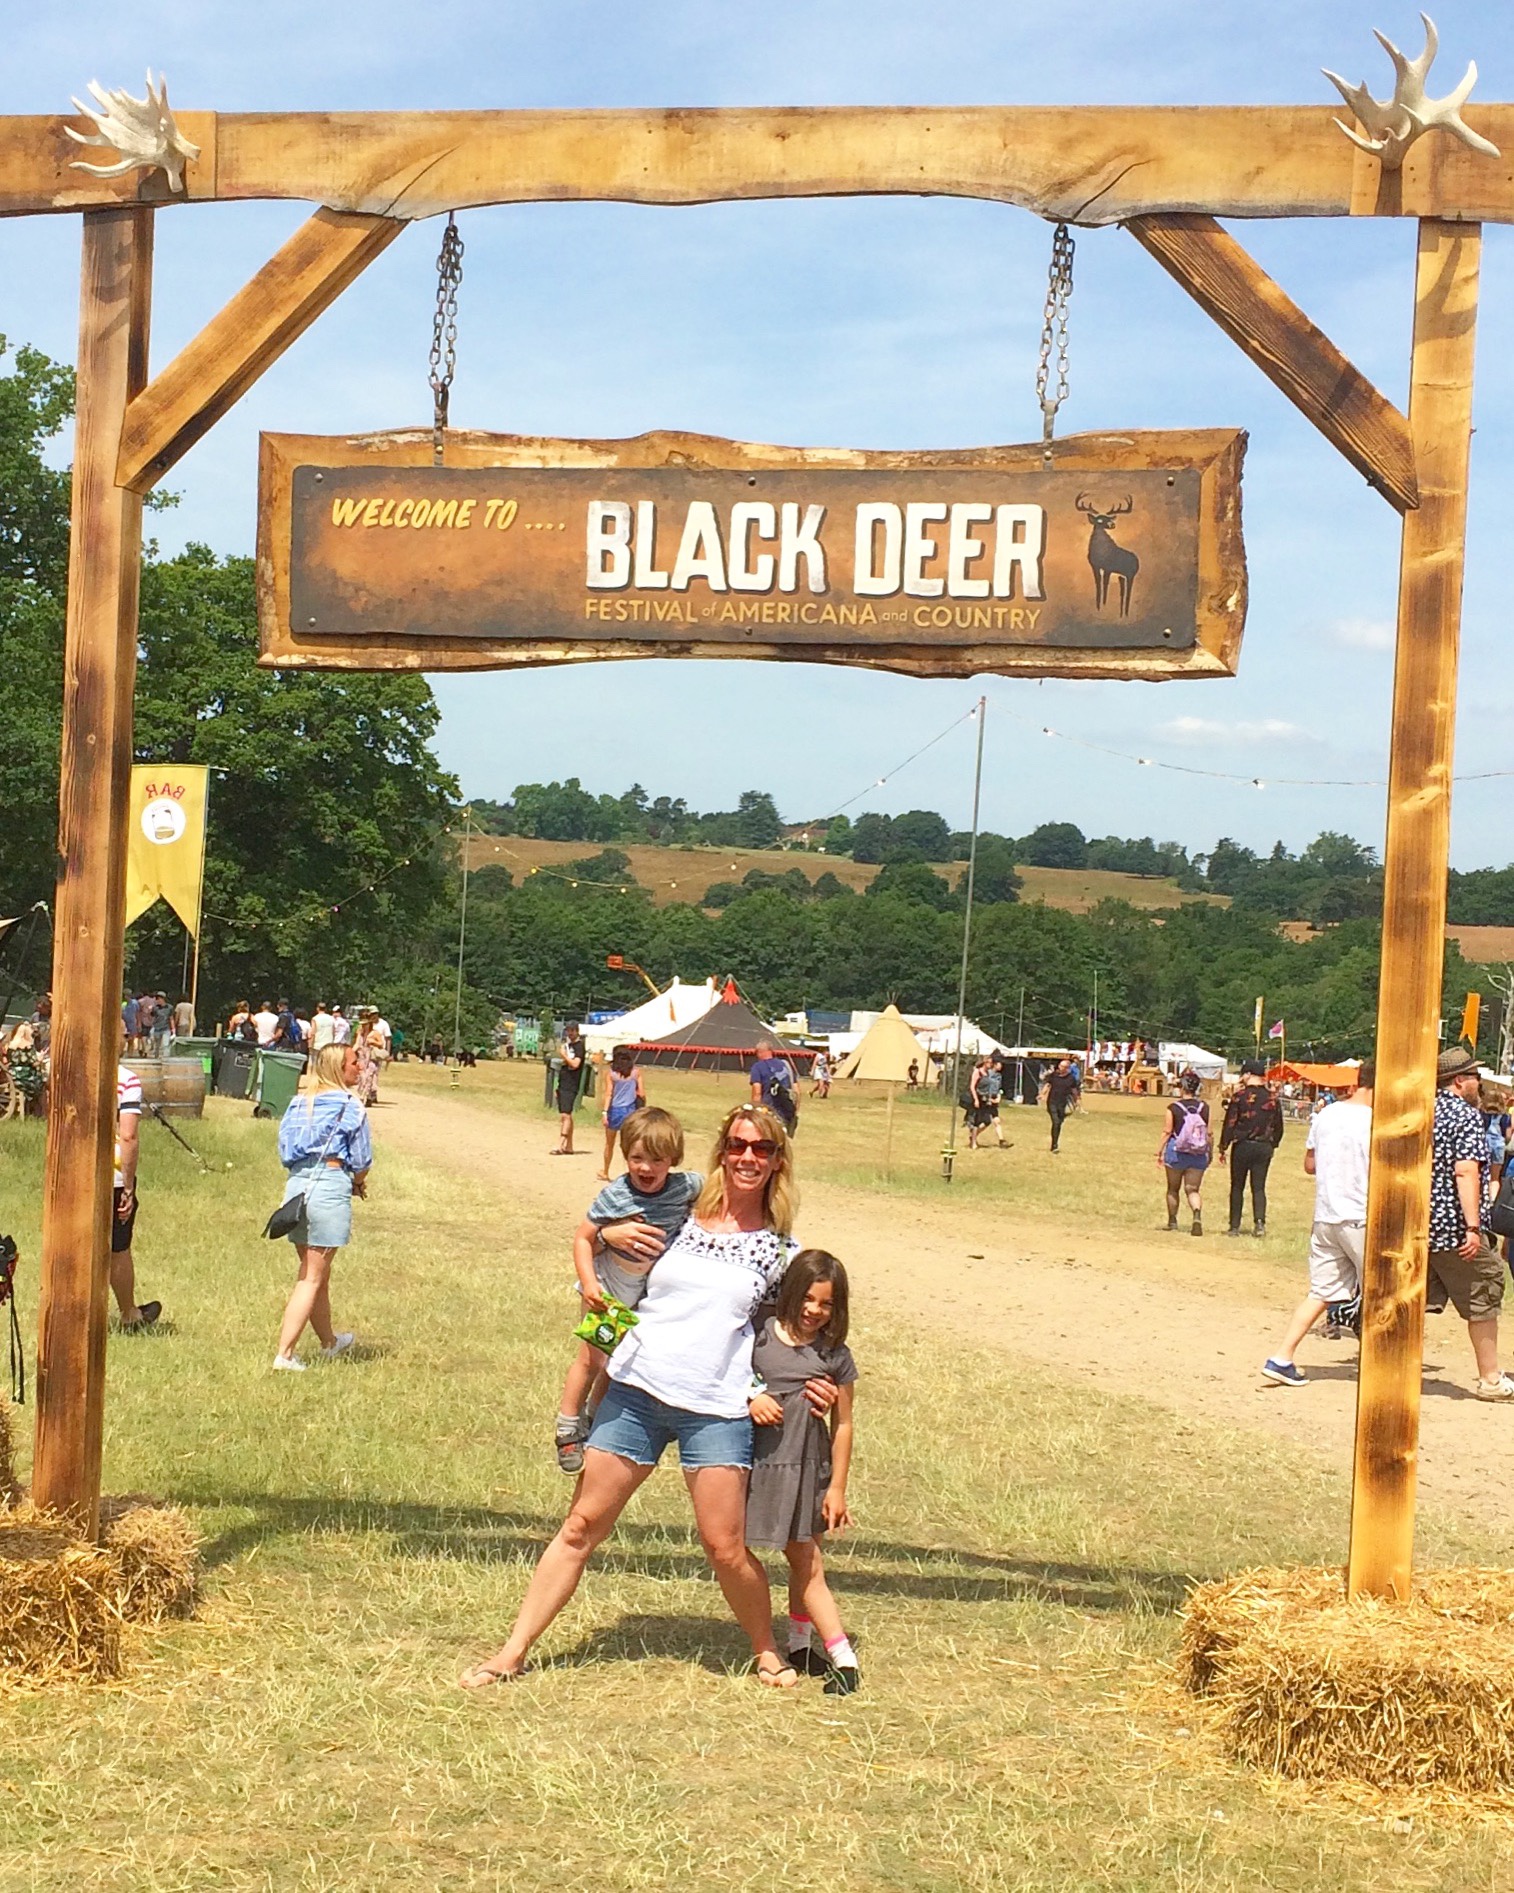 5 Reasons Black Deer Festival is Perfect for Families